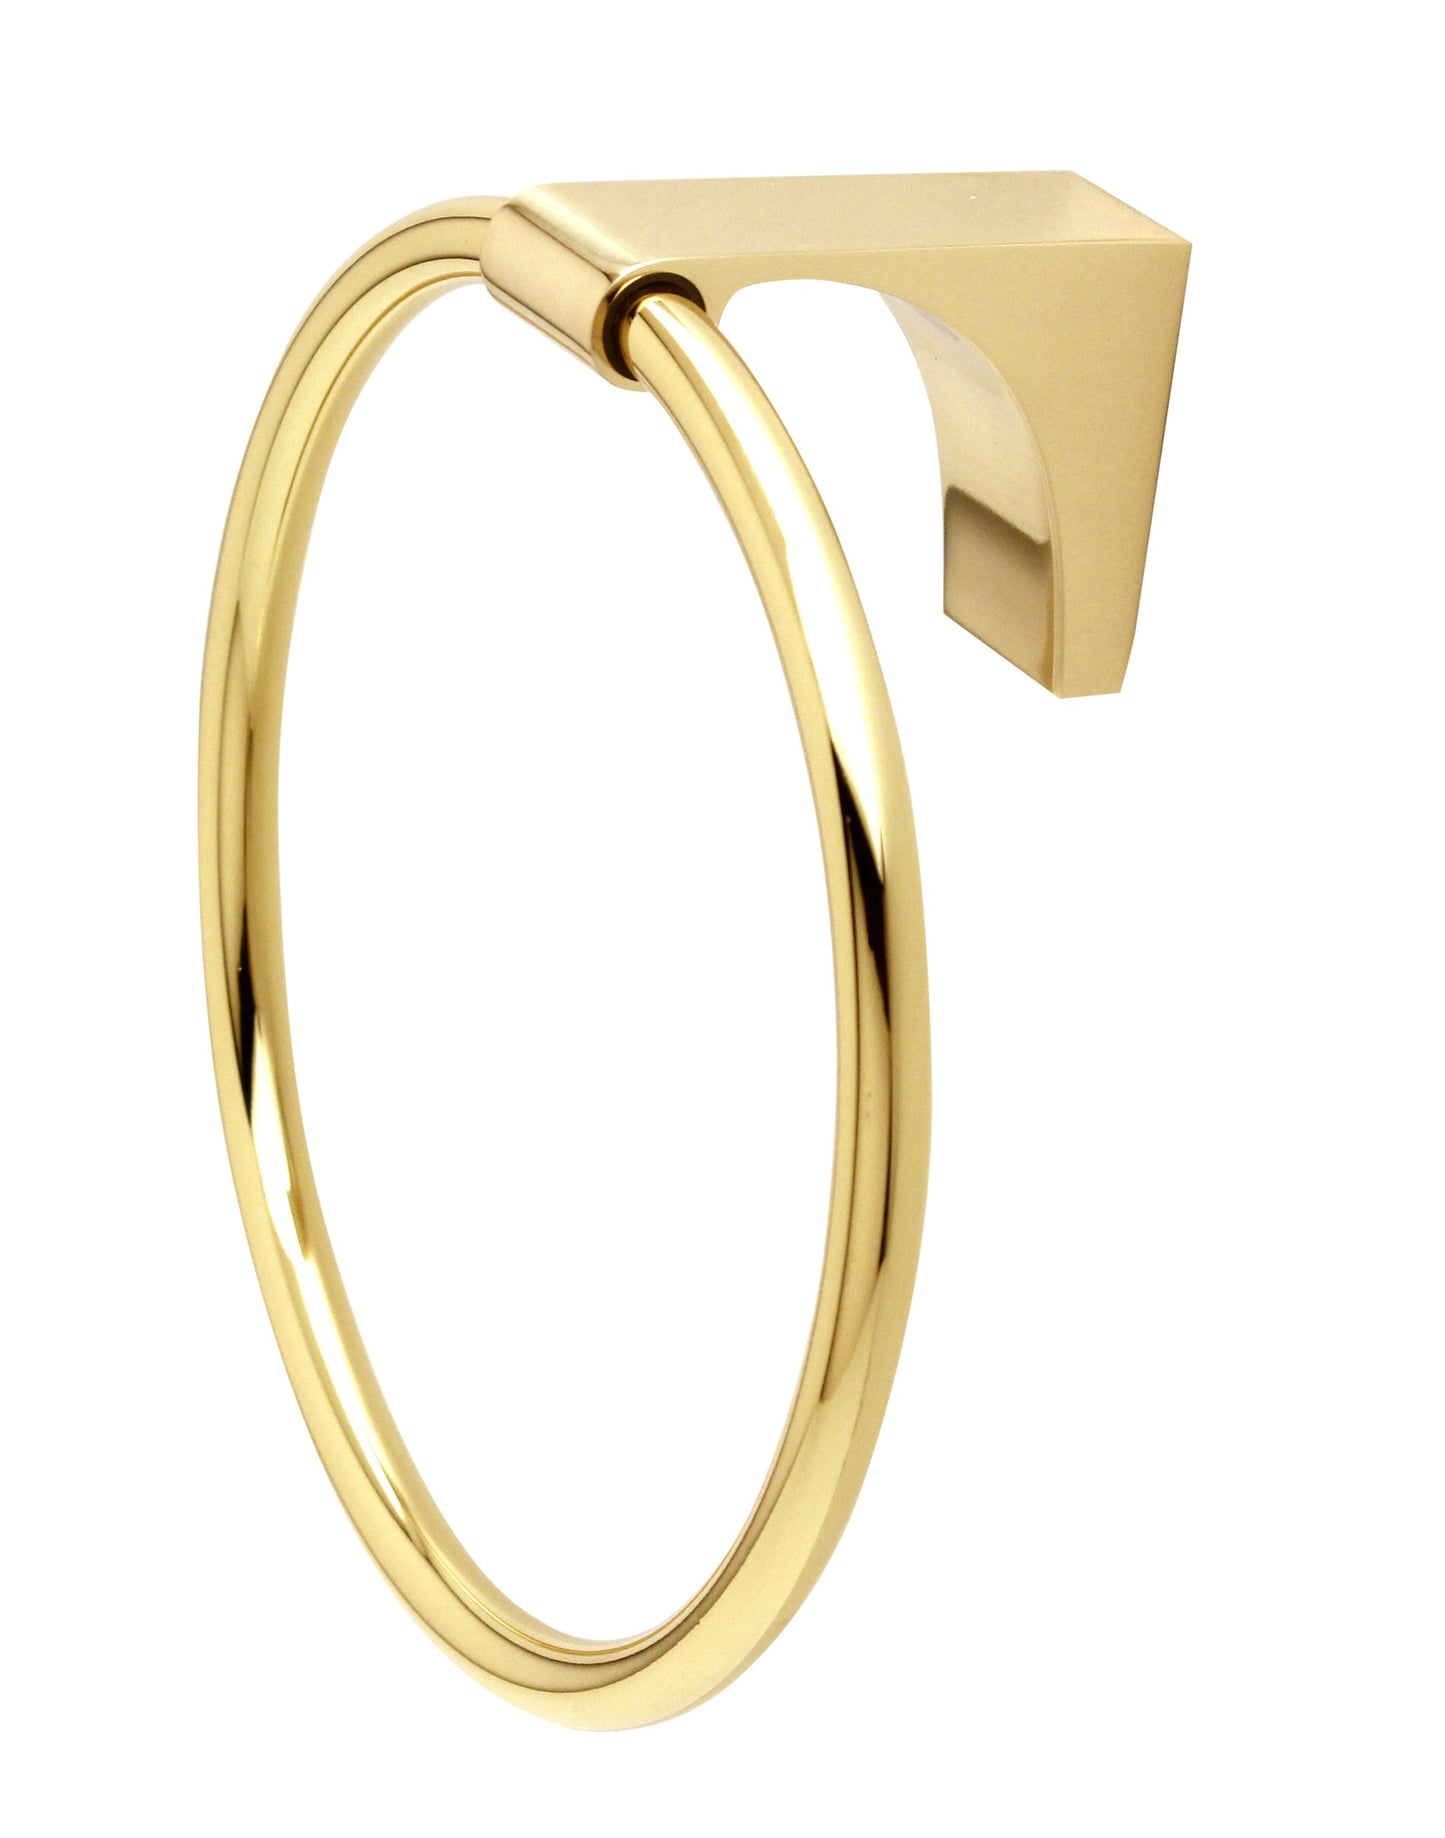 Polished Brass Towel Ring